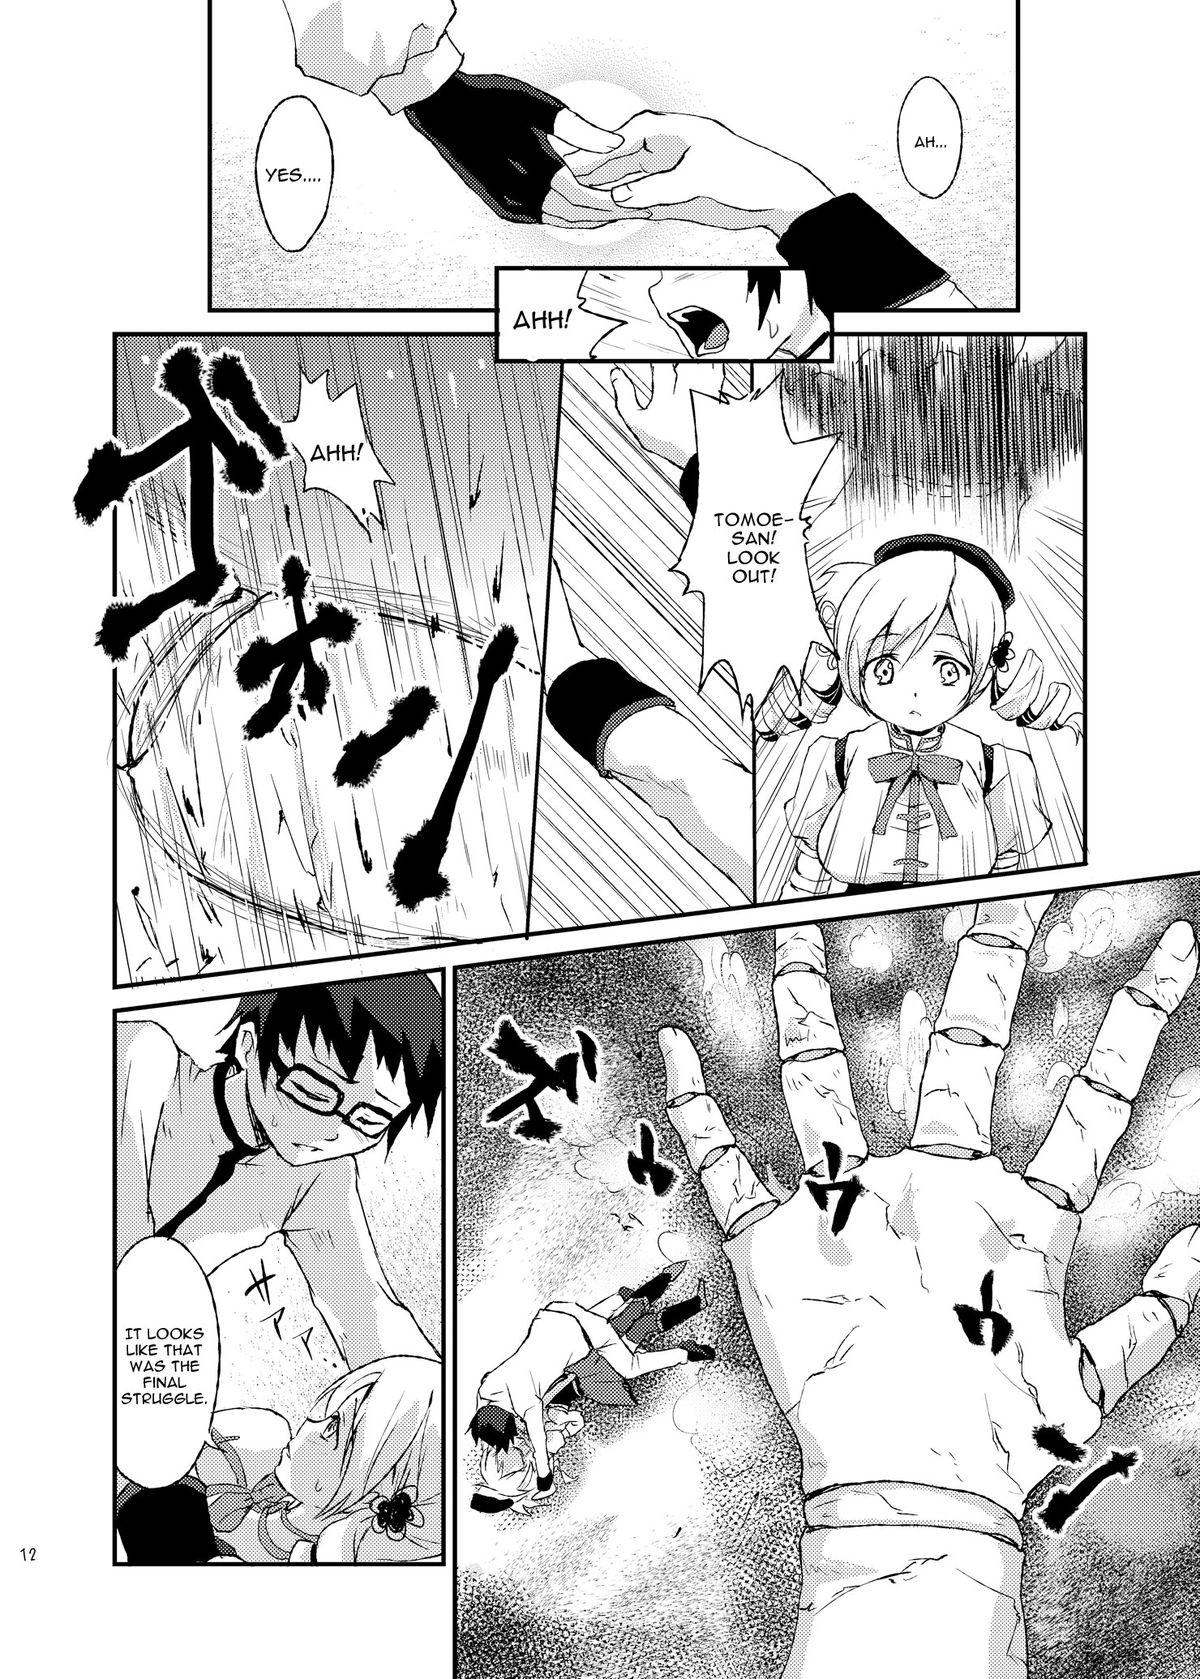 Weird Affection - Puella magi madoka magica Tight Pussy - Page 11